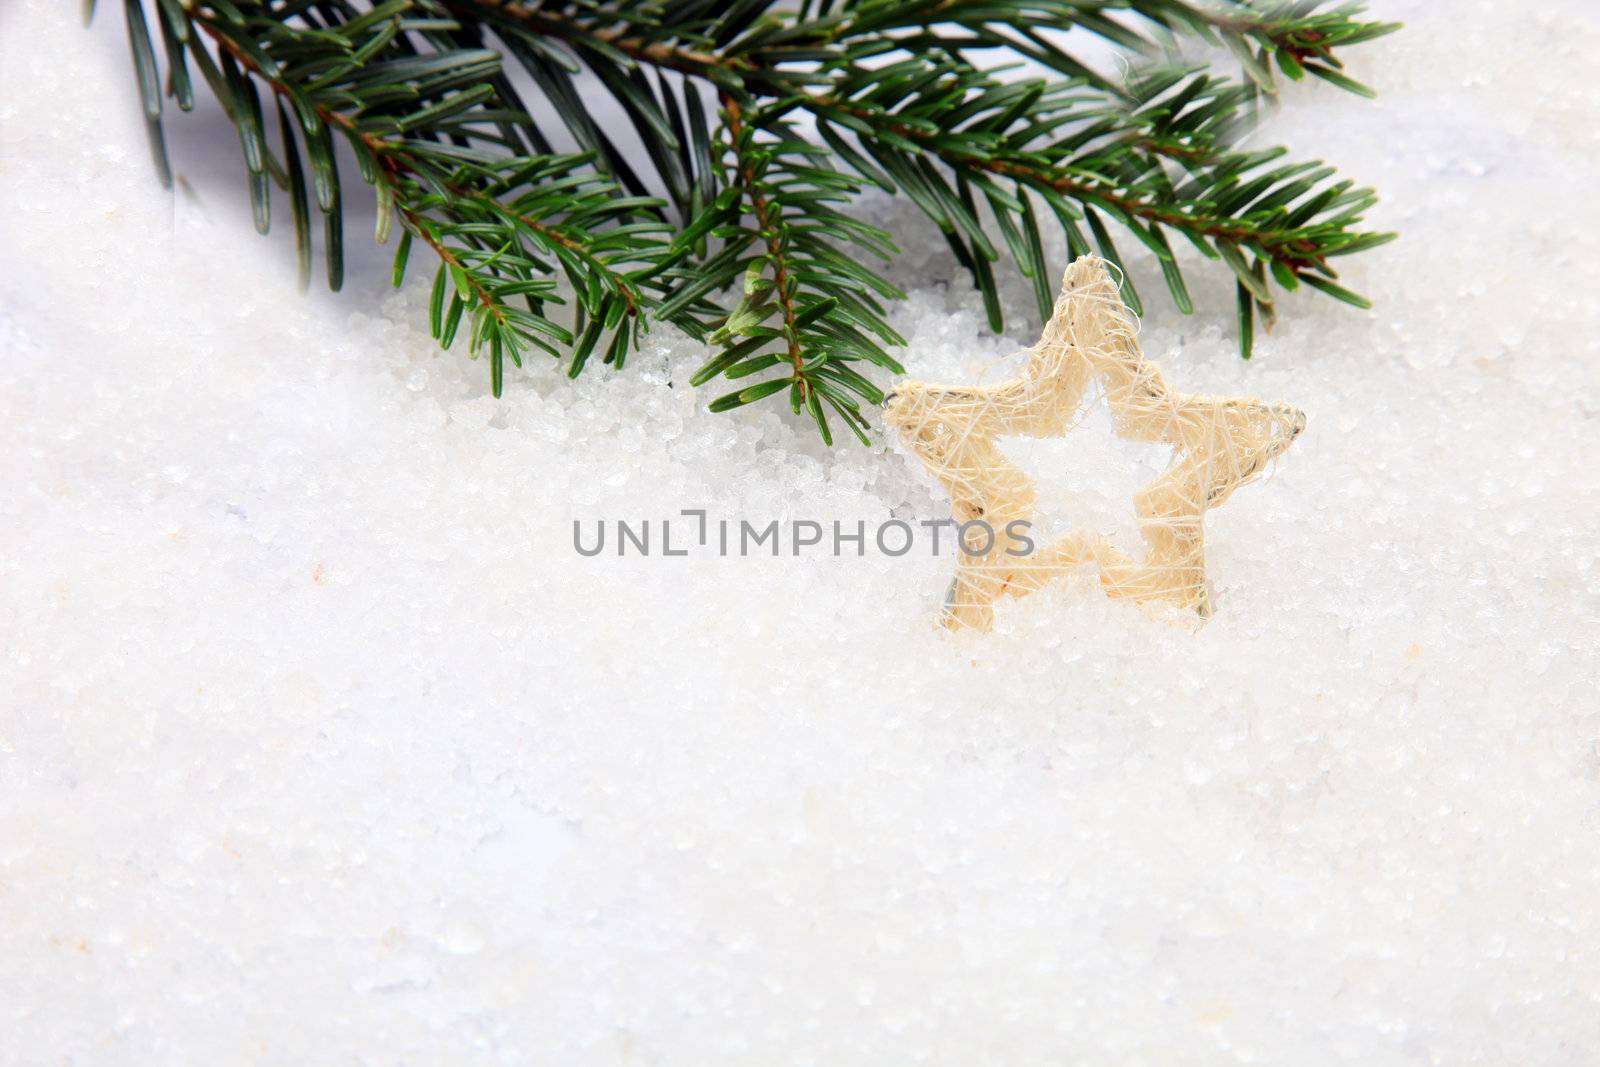 White Christmas star ornament with pine needles on snow